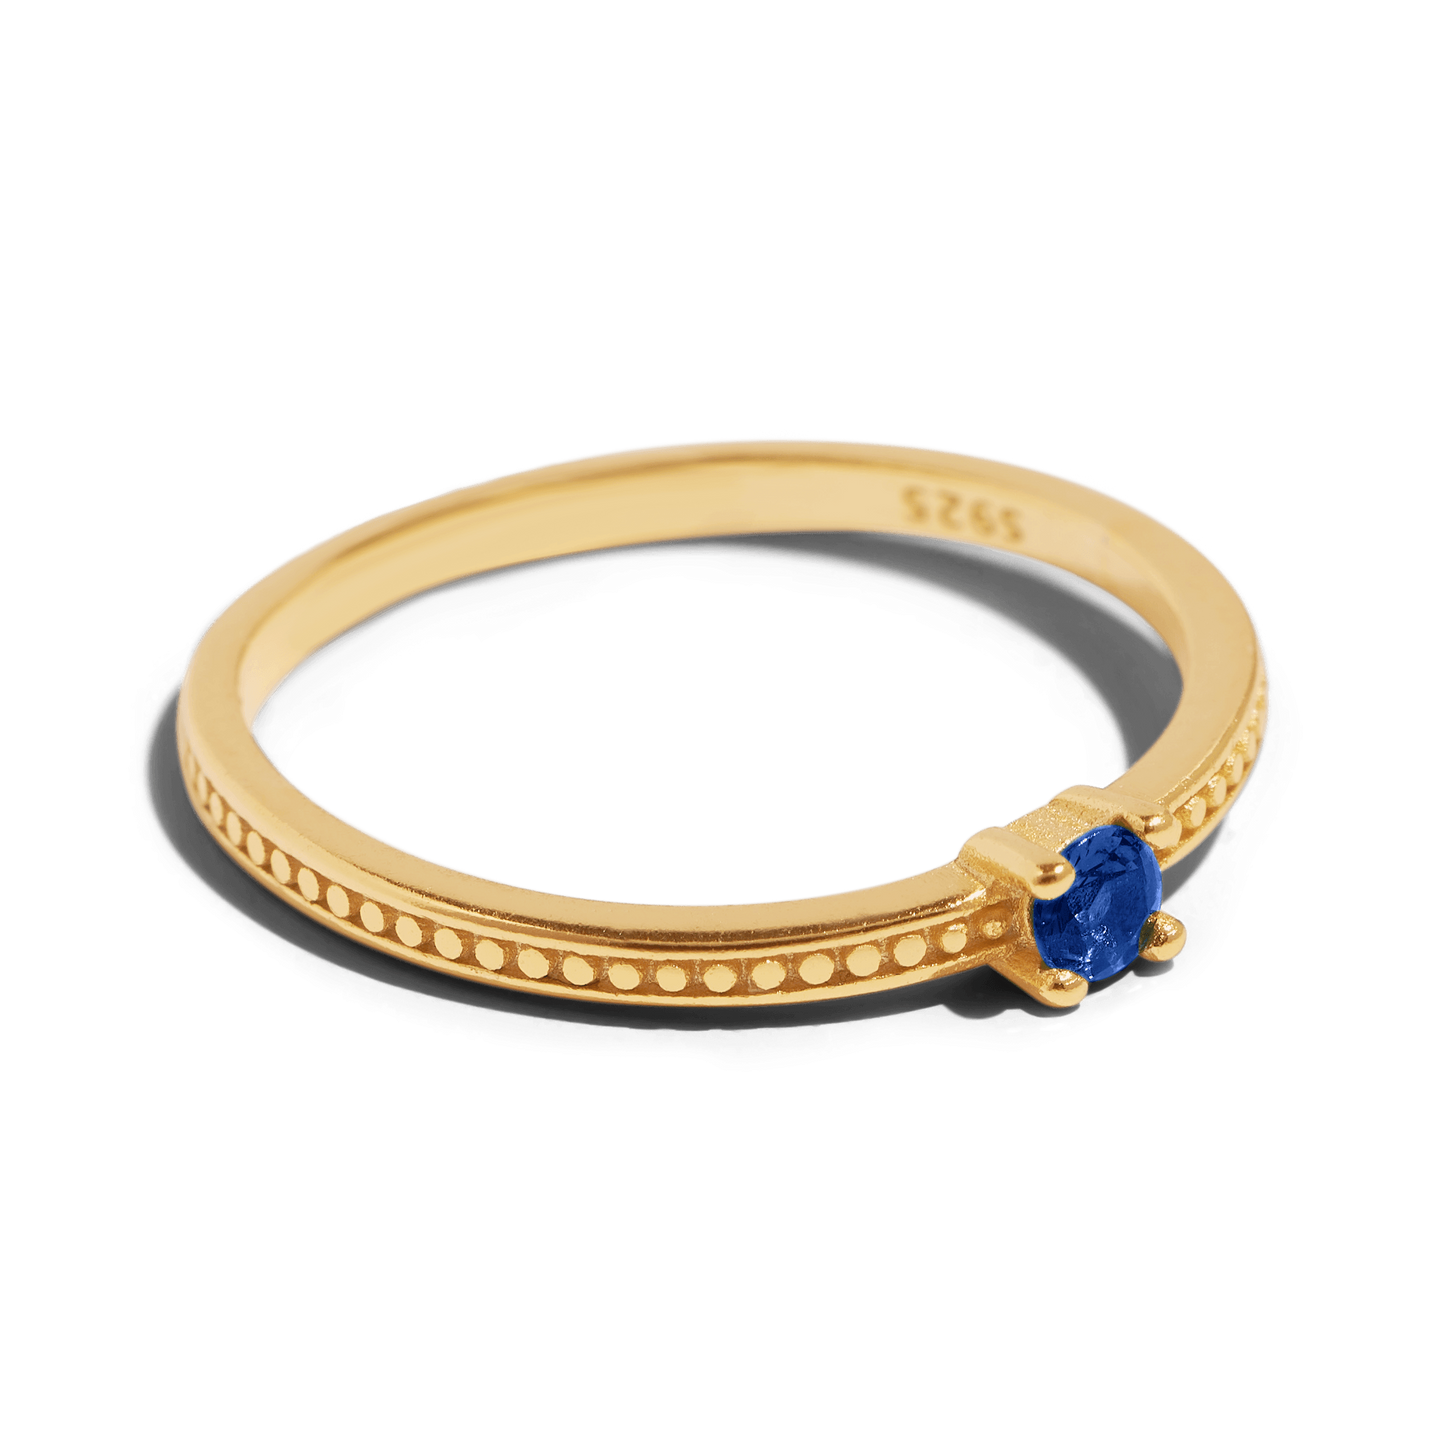 THE EMMA RING BLUE - Solid 14k gold